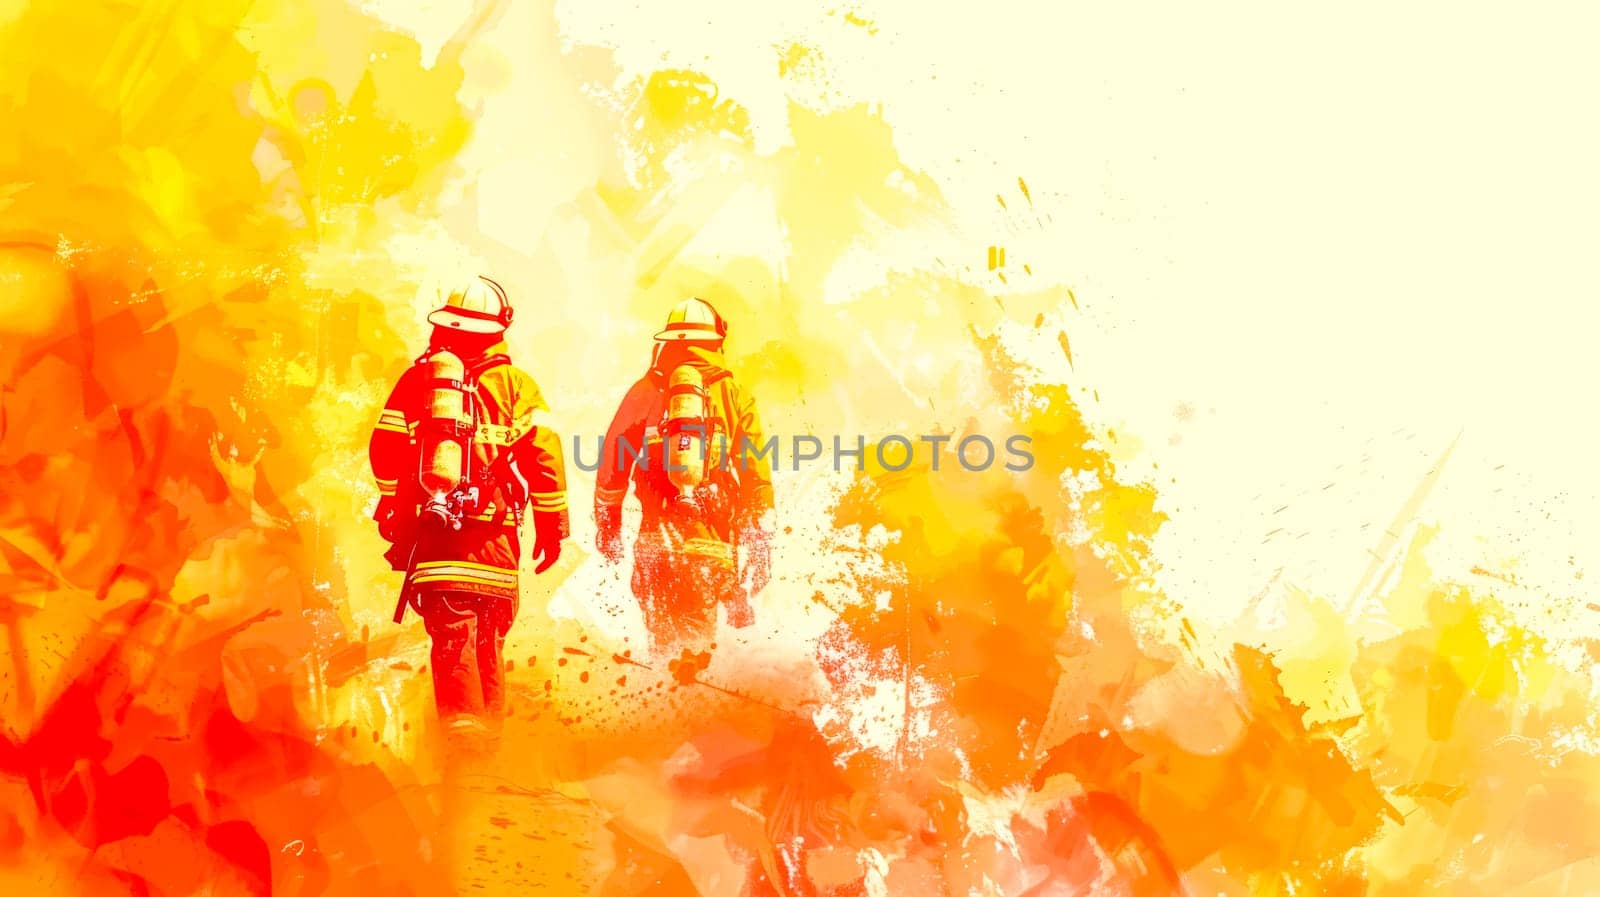 Silhouettes of firefighters advancing through intense flames, depicted in vibrant orange and yellow hues